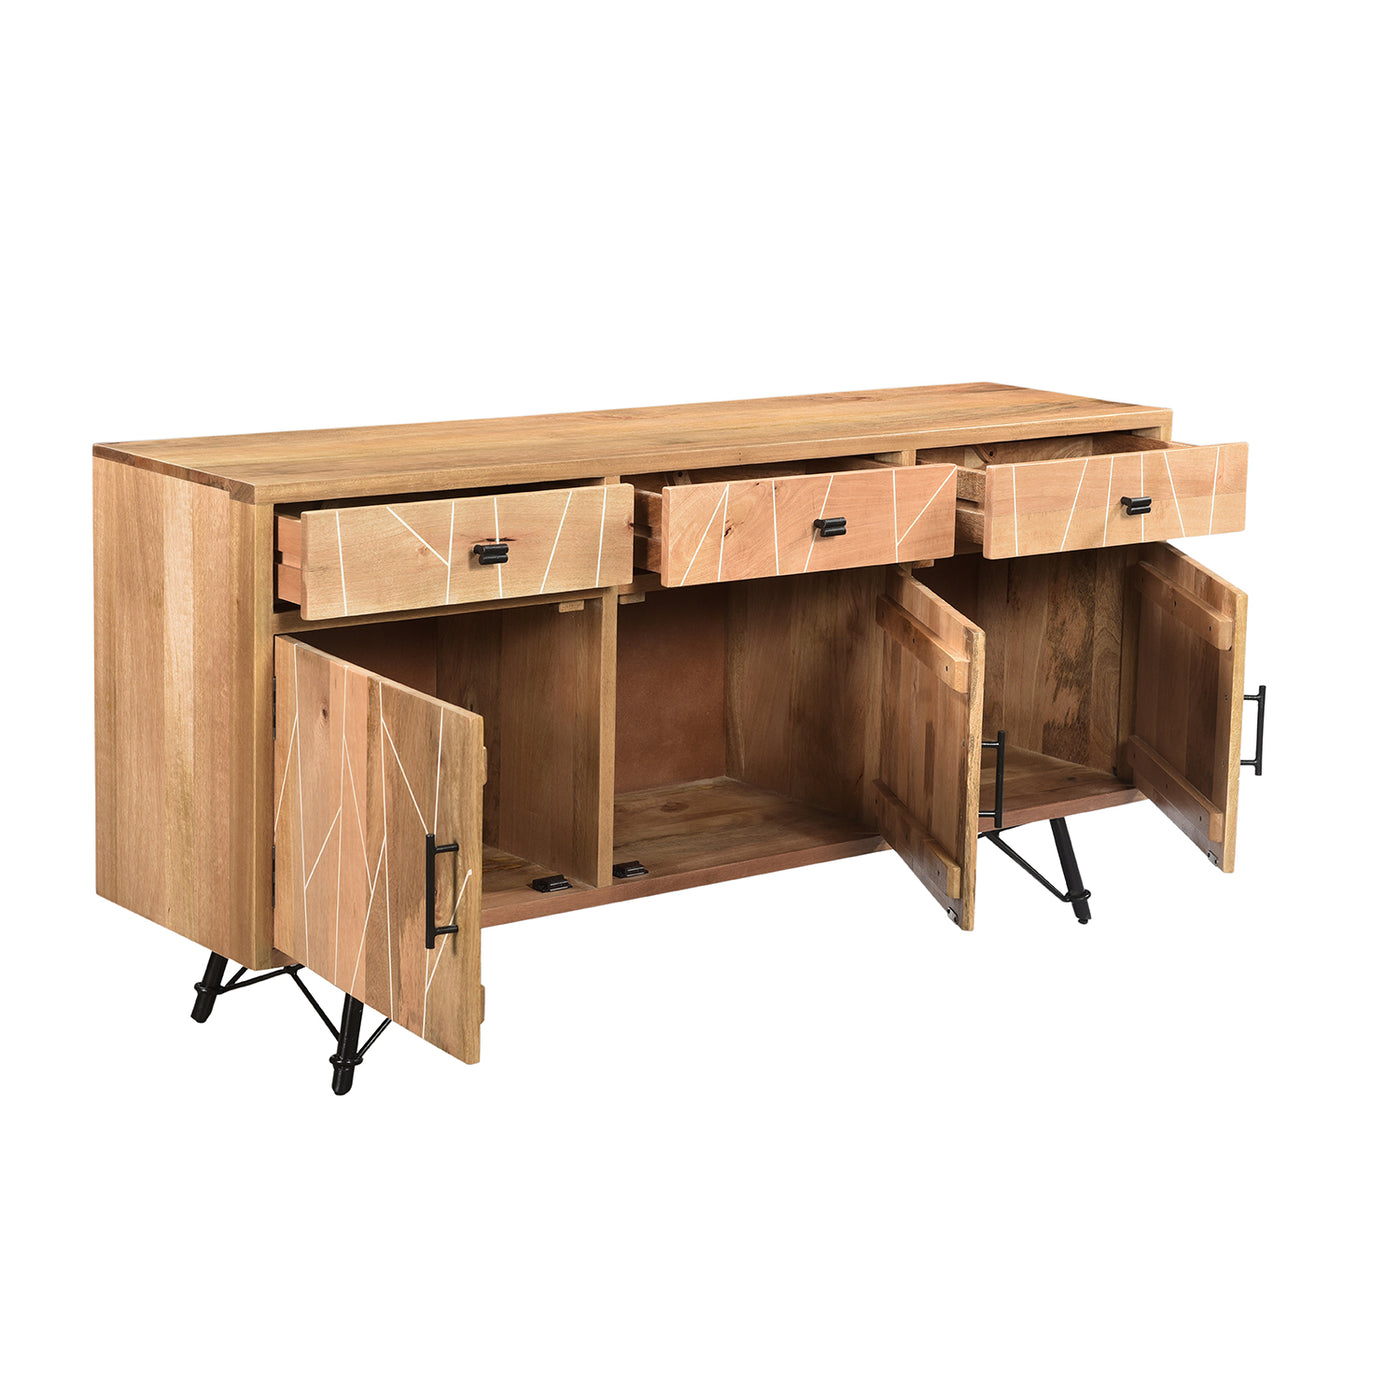 Mosaic 3-Drawer Dining Buffet in Natural Finish